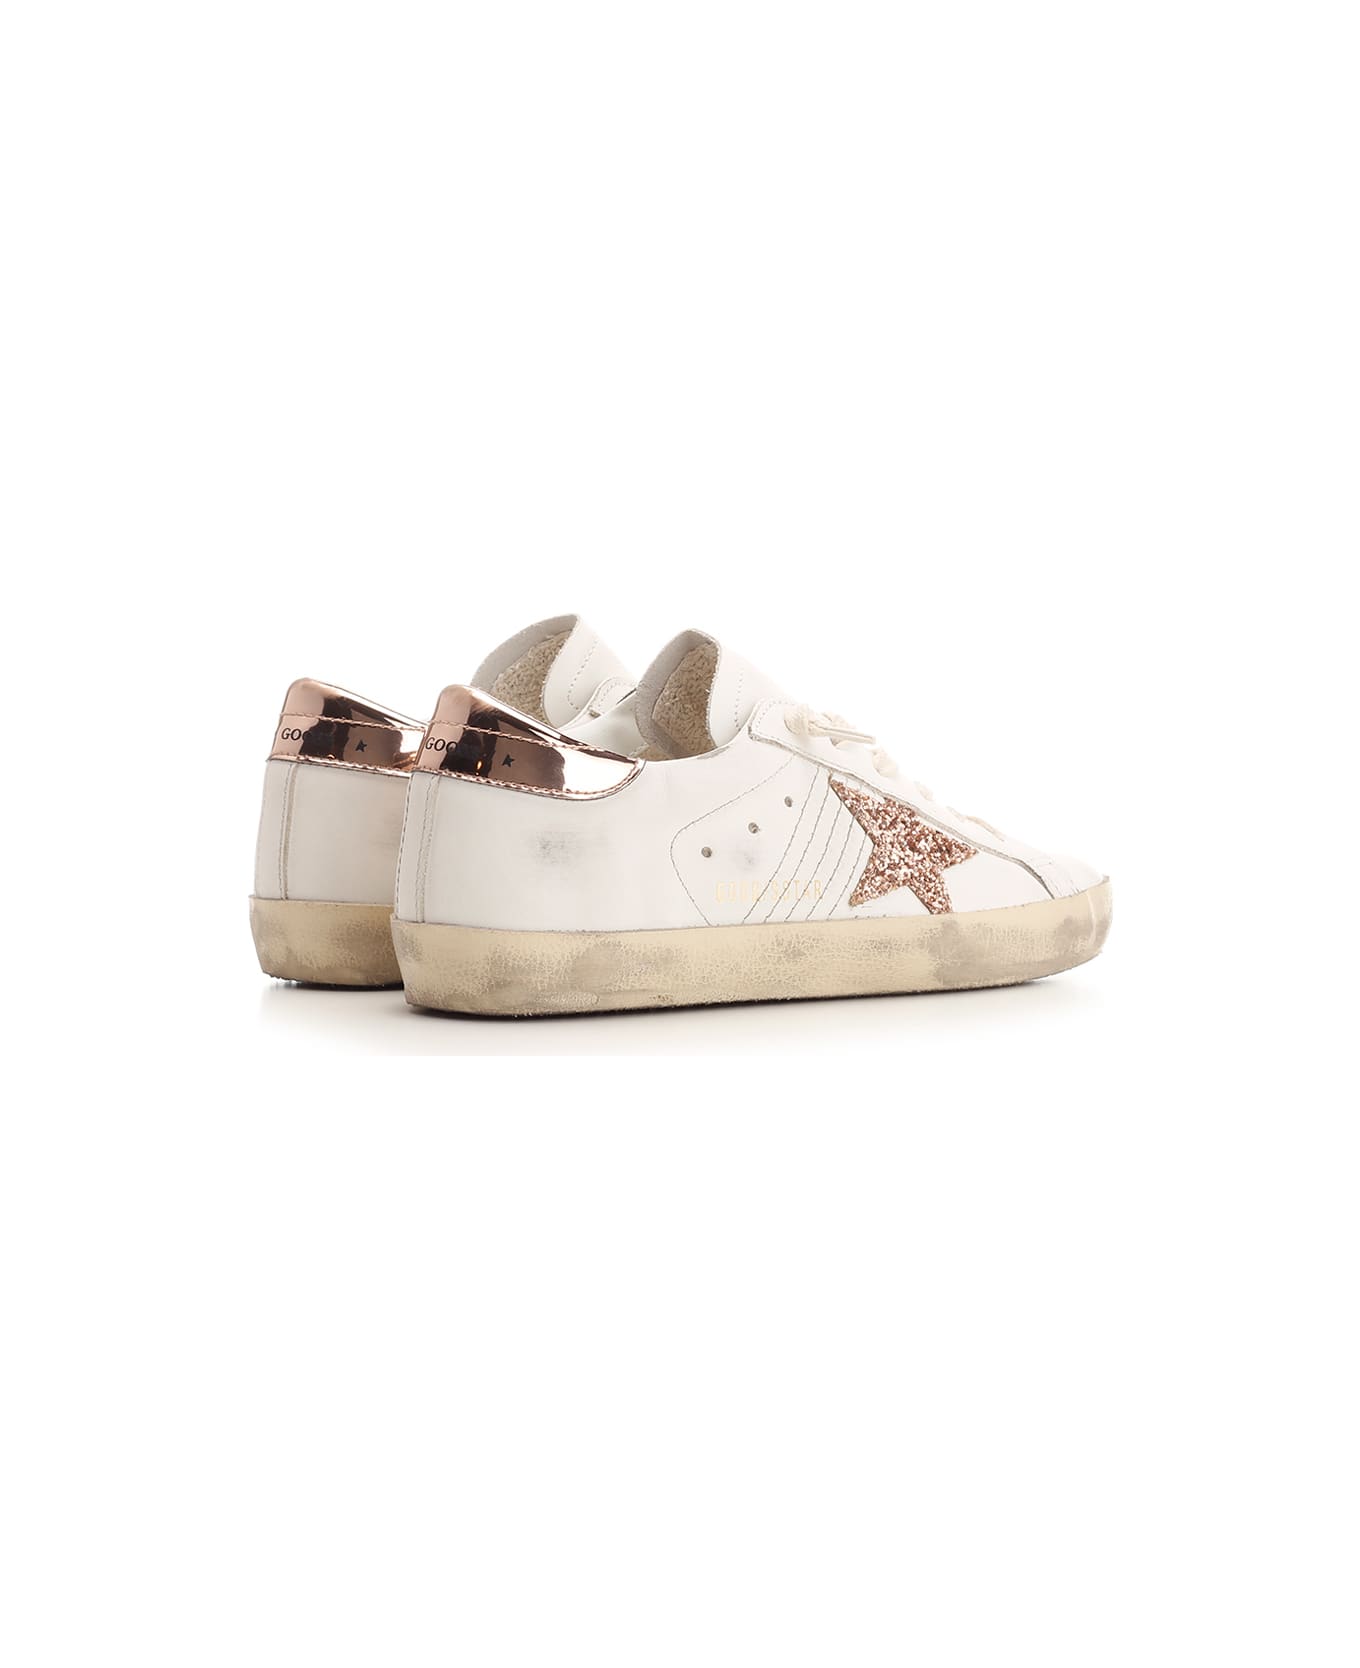 Golden Goose Superstar Classic Sneakers - WHITE/PEACH PINK/ANTIQUE ROSE